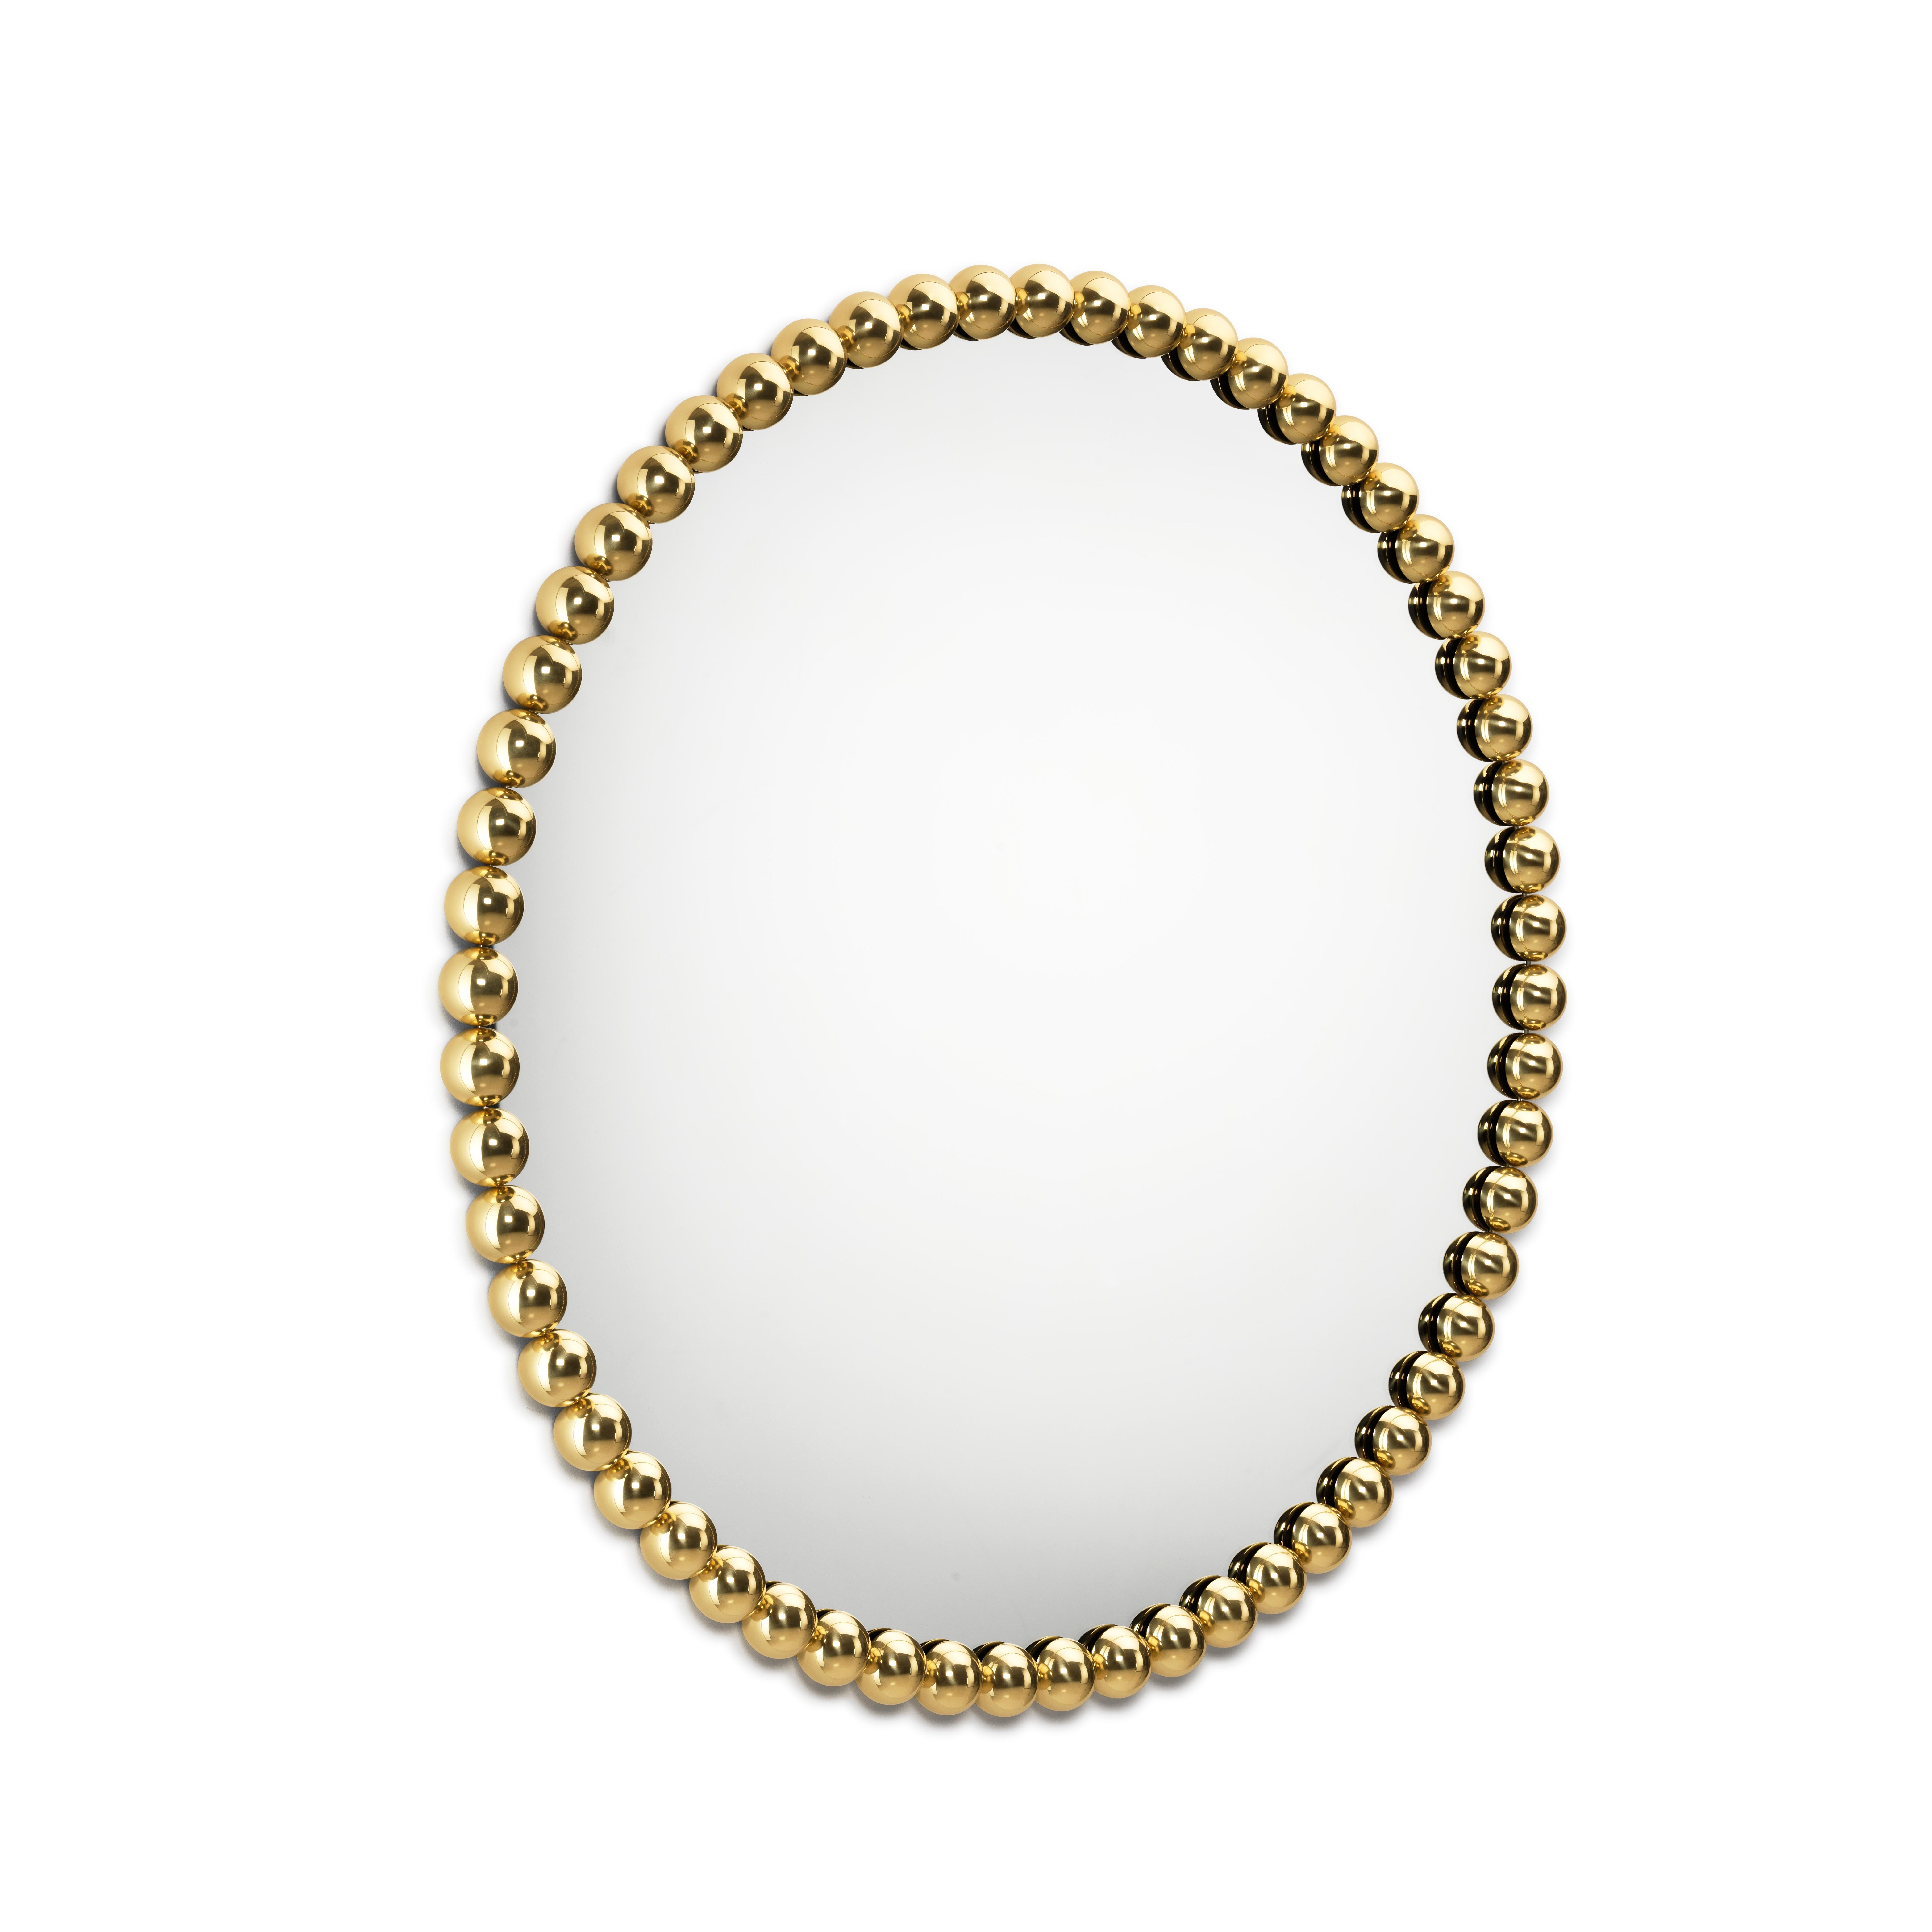 Gioiello mirrors are inspired by the infinite possibilities of a brass sphere as a single building block, designed to create a collection of objects and their story through repetition and play.
Brass spheres are polished to perfection, looking as